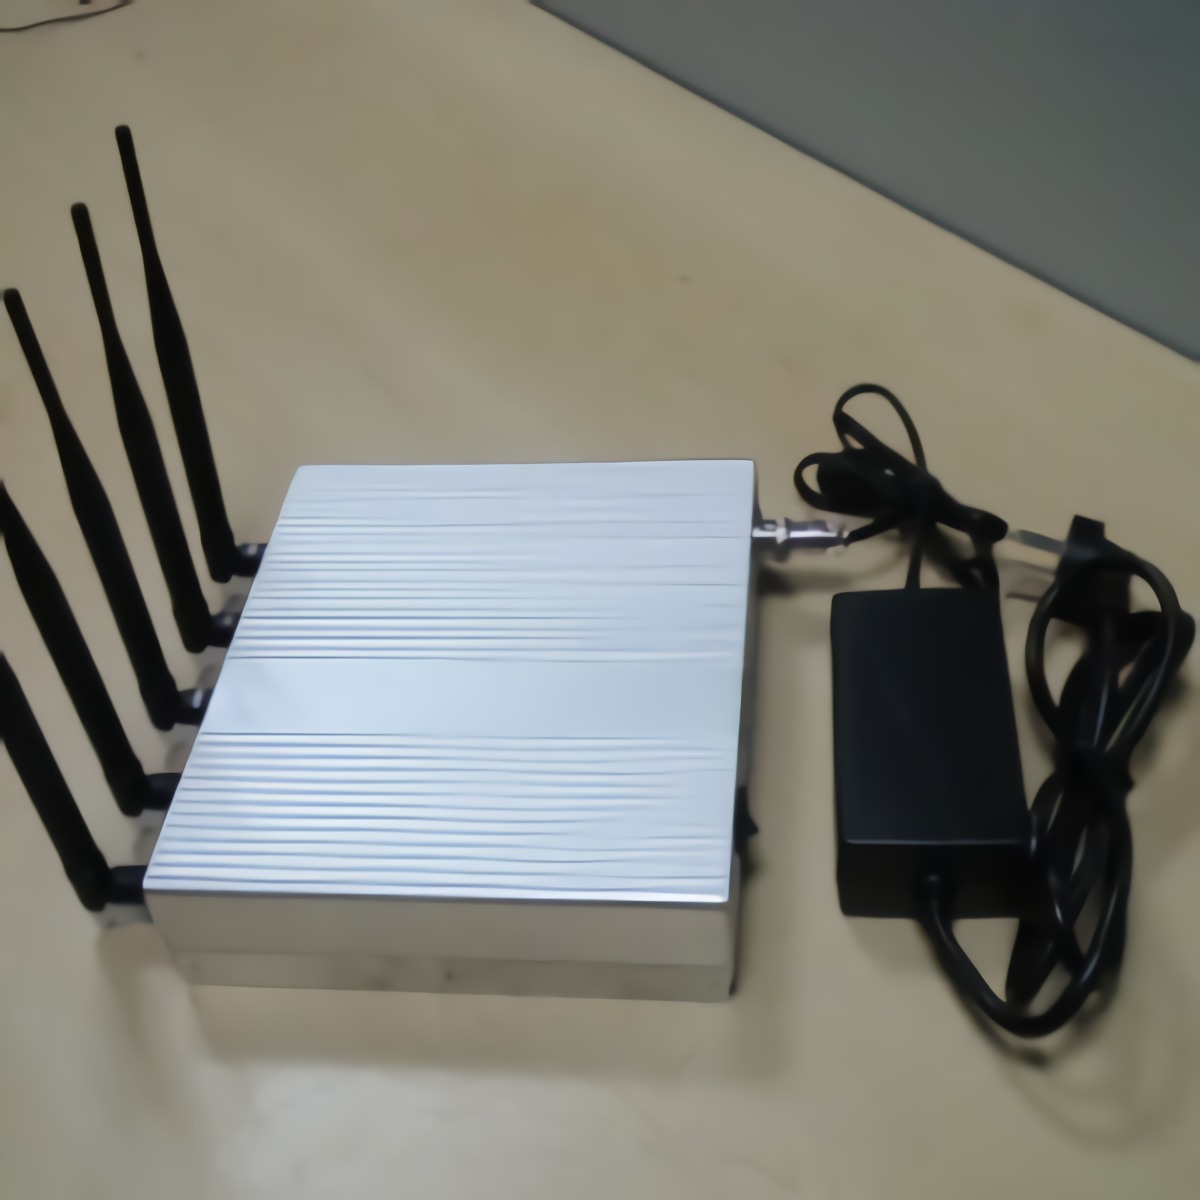 High Quality Cell Phone Jammer with 5 Antennas